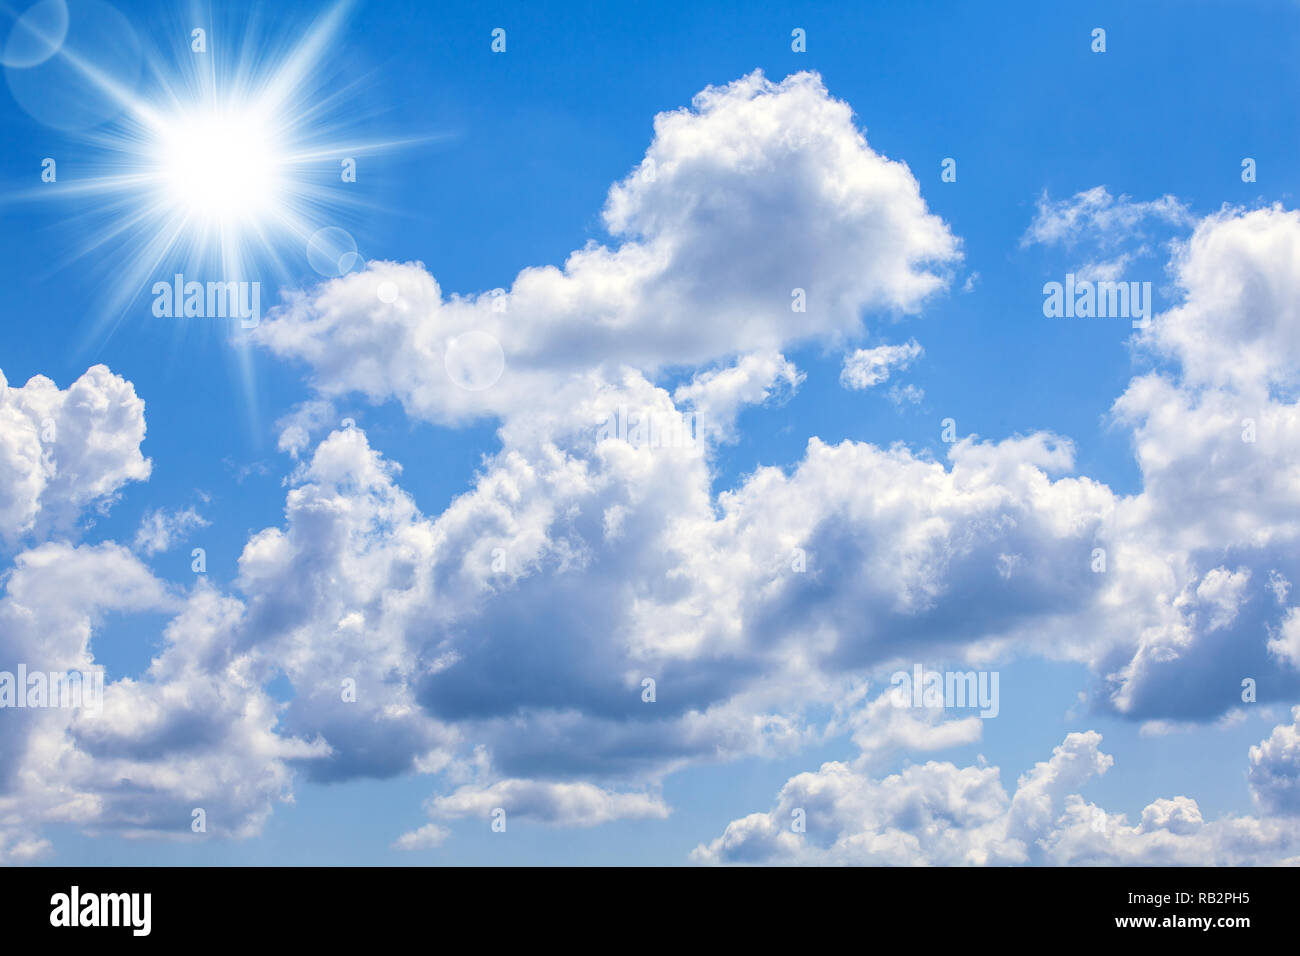 A blue sky with bright sun and clouds. Stock Photo